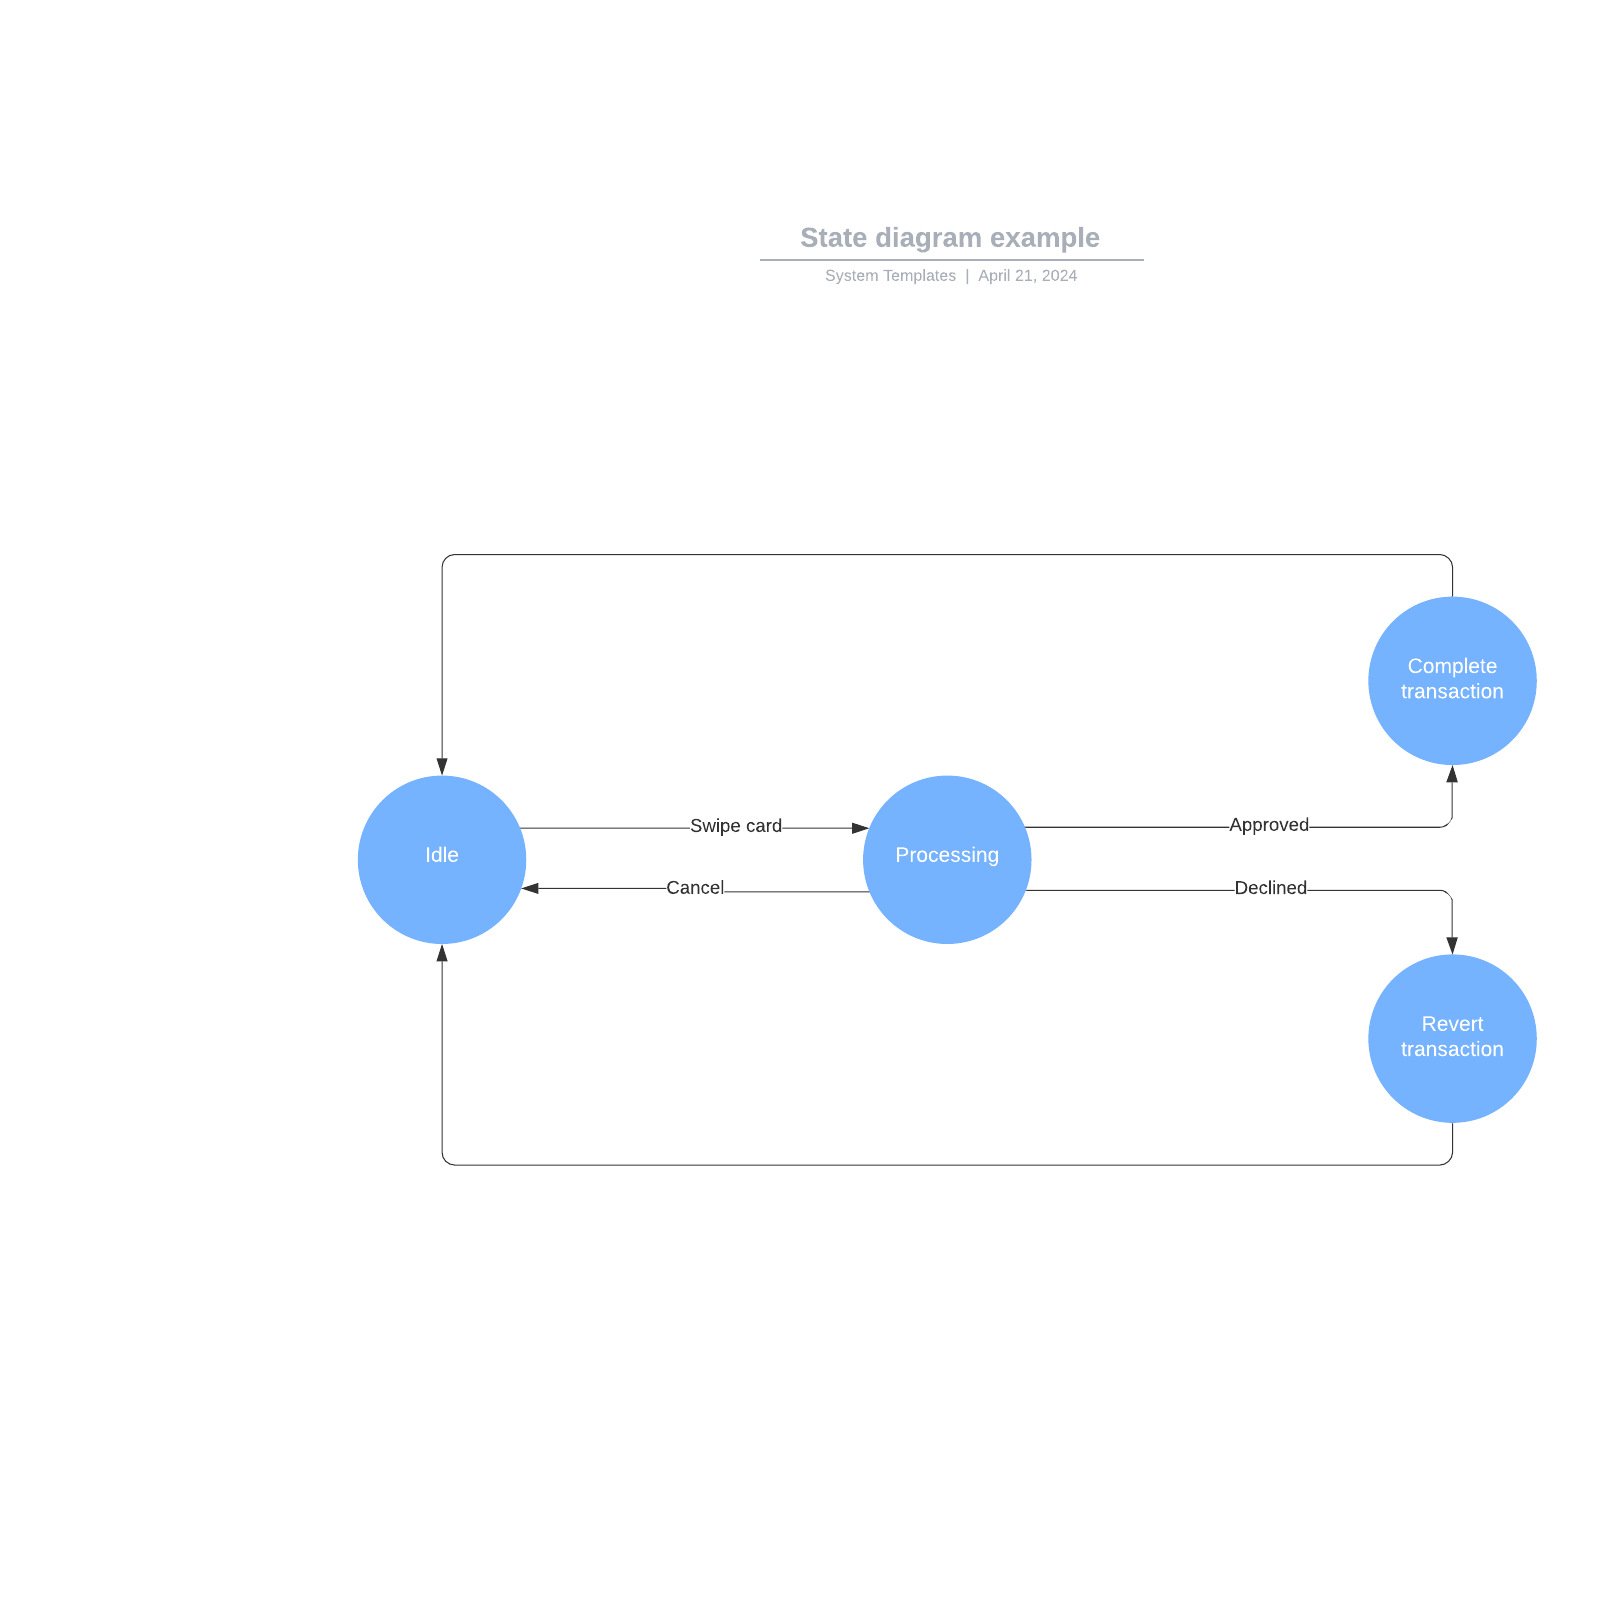 State diagram example example